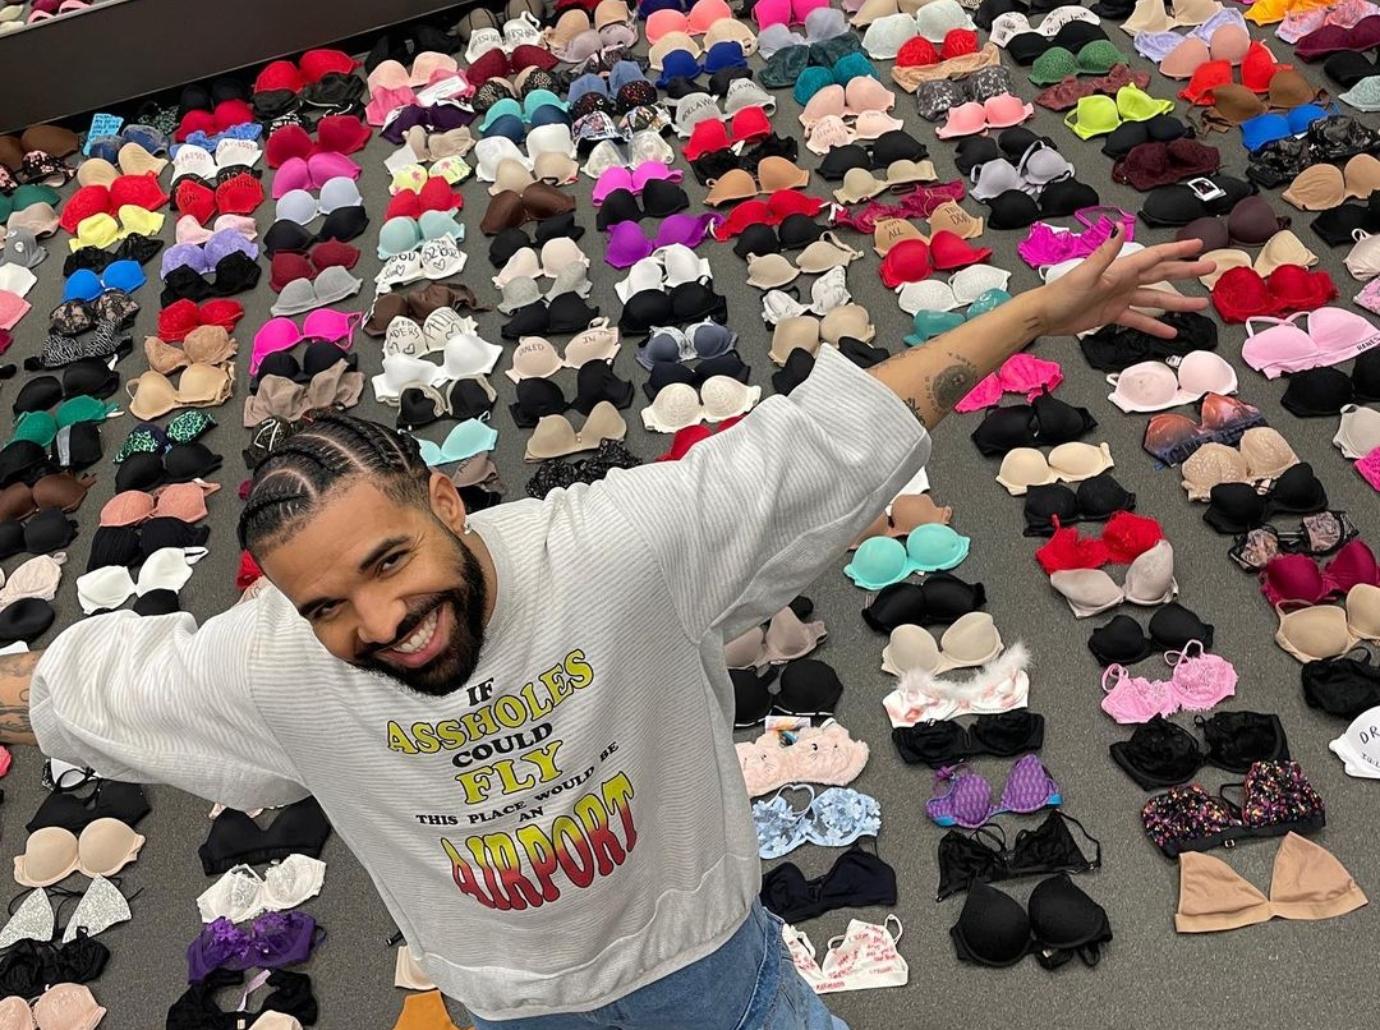 Drake Trolled For Sharing His Collection Of Bras From Fans: Photo